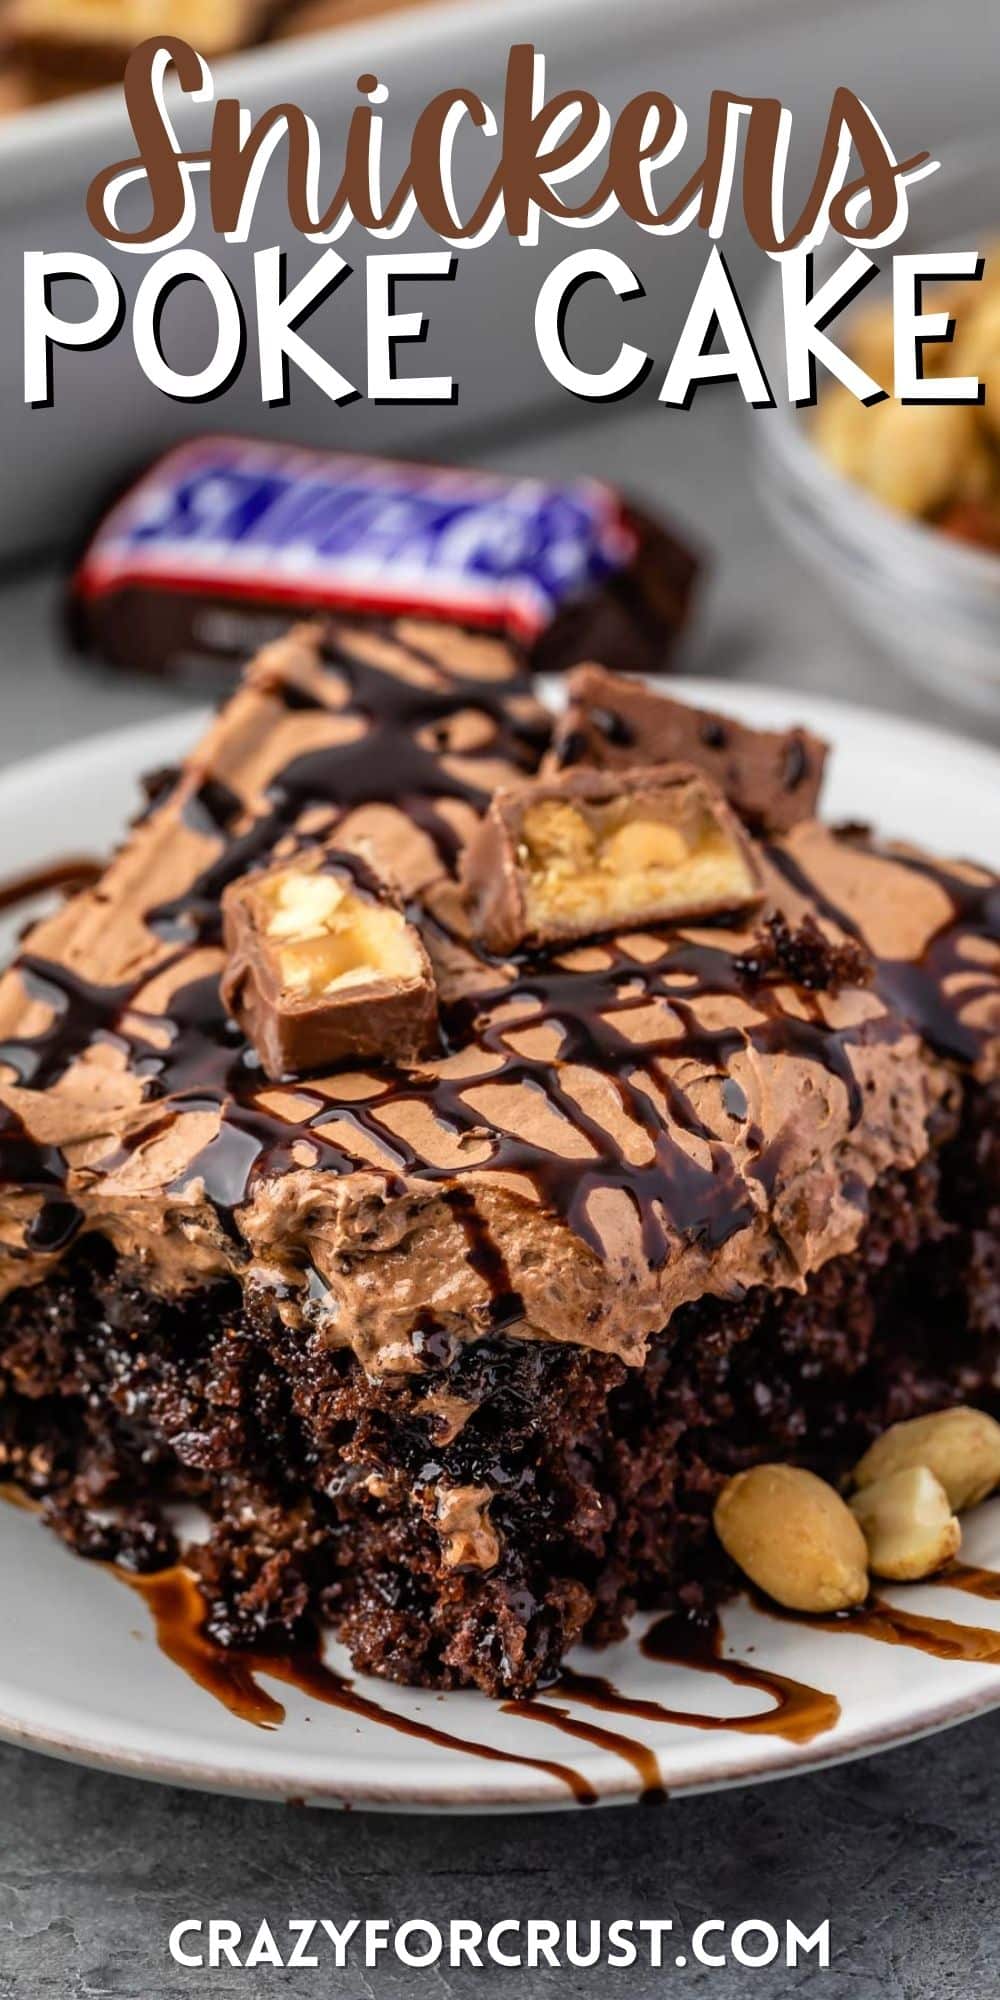 one square slice of snickers poke cake on a white plate with words on the image